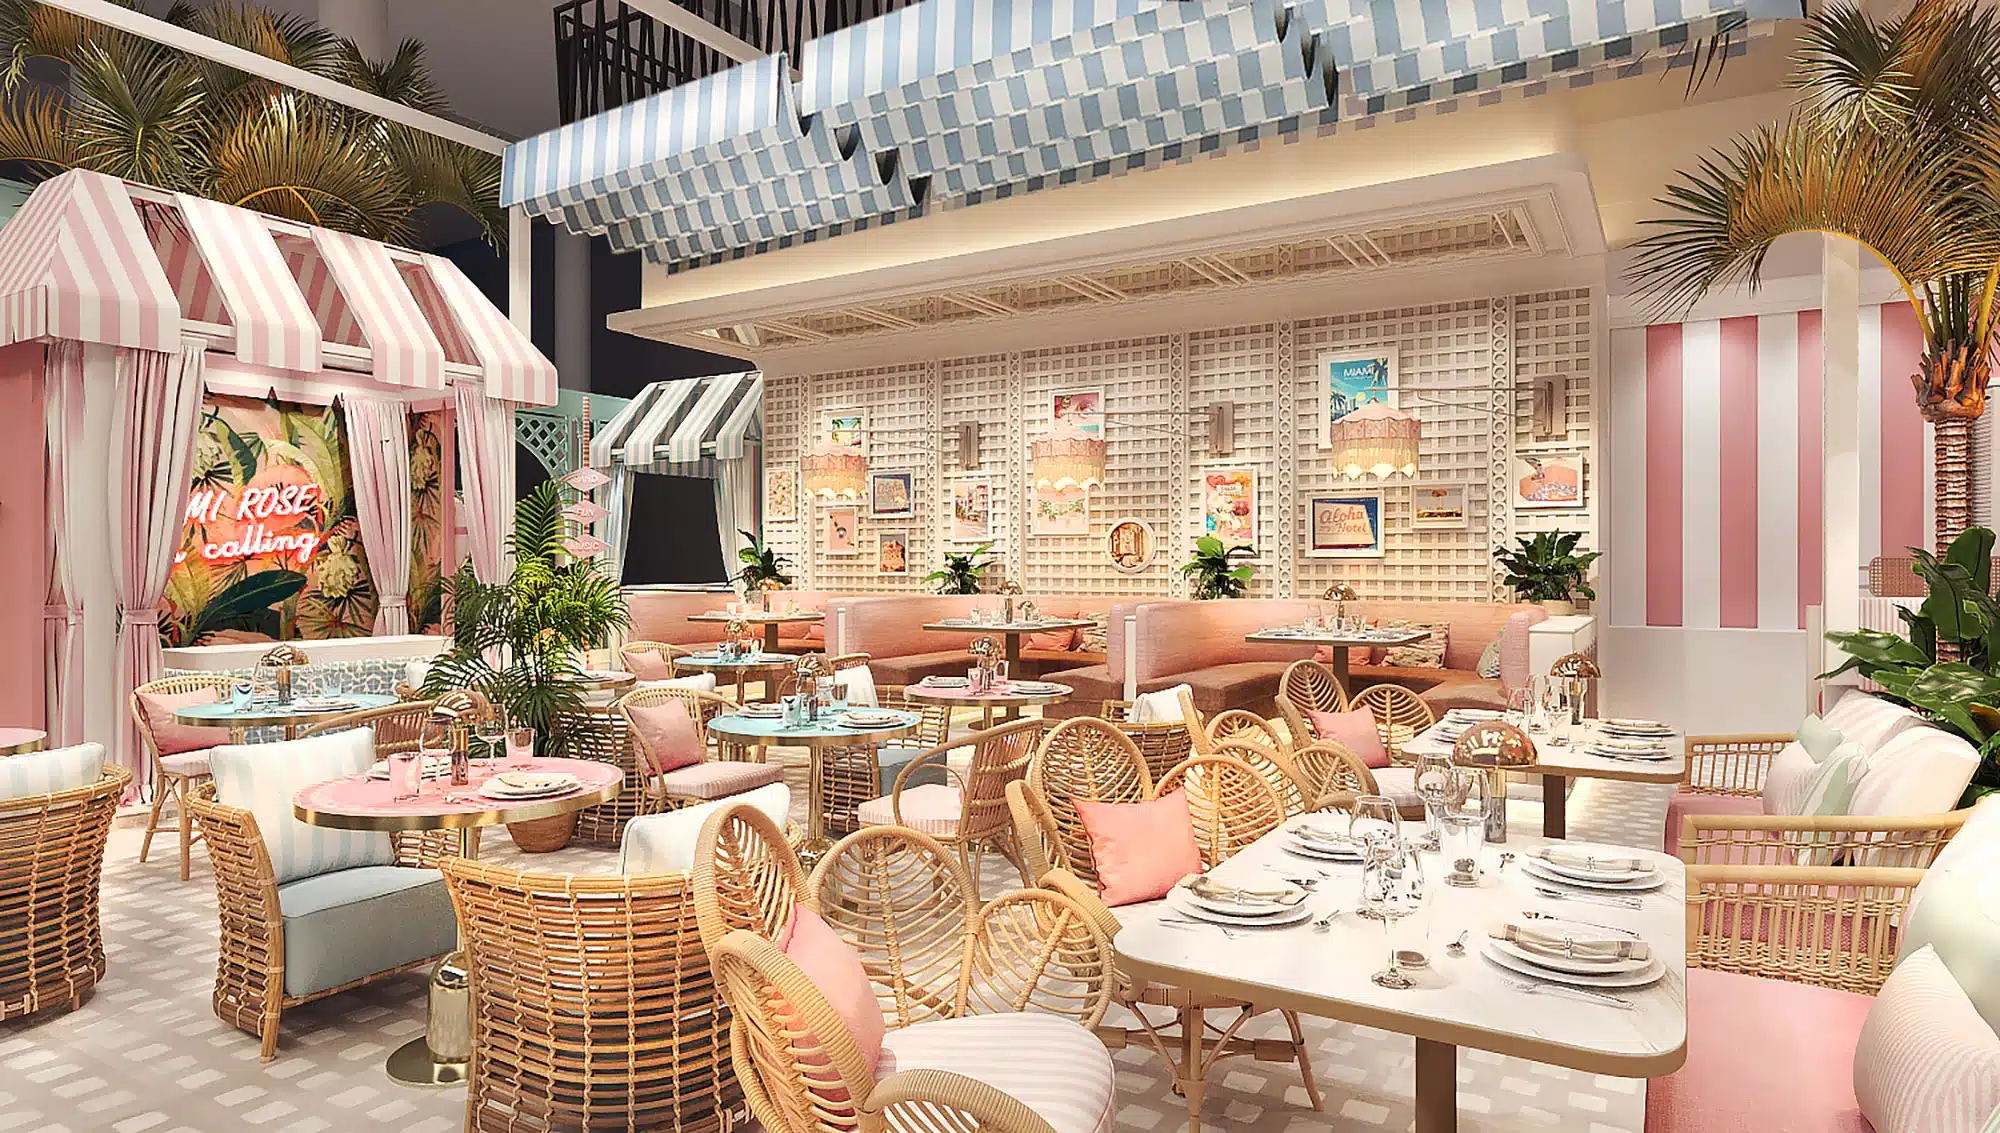 We can see the 3D plan of the main room in Mami Rose Restaurant located in EmSphere mall in Bangkok